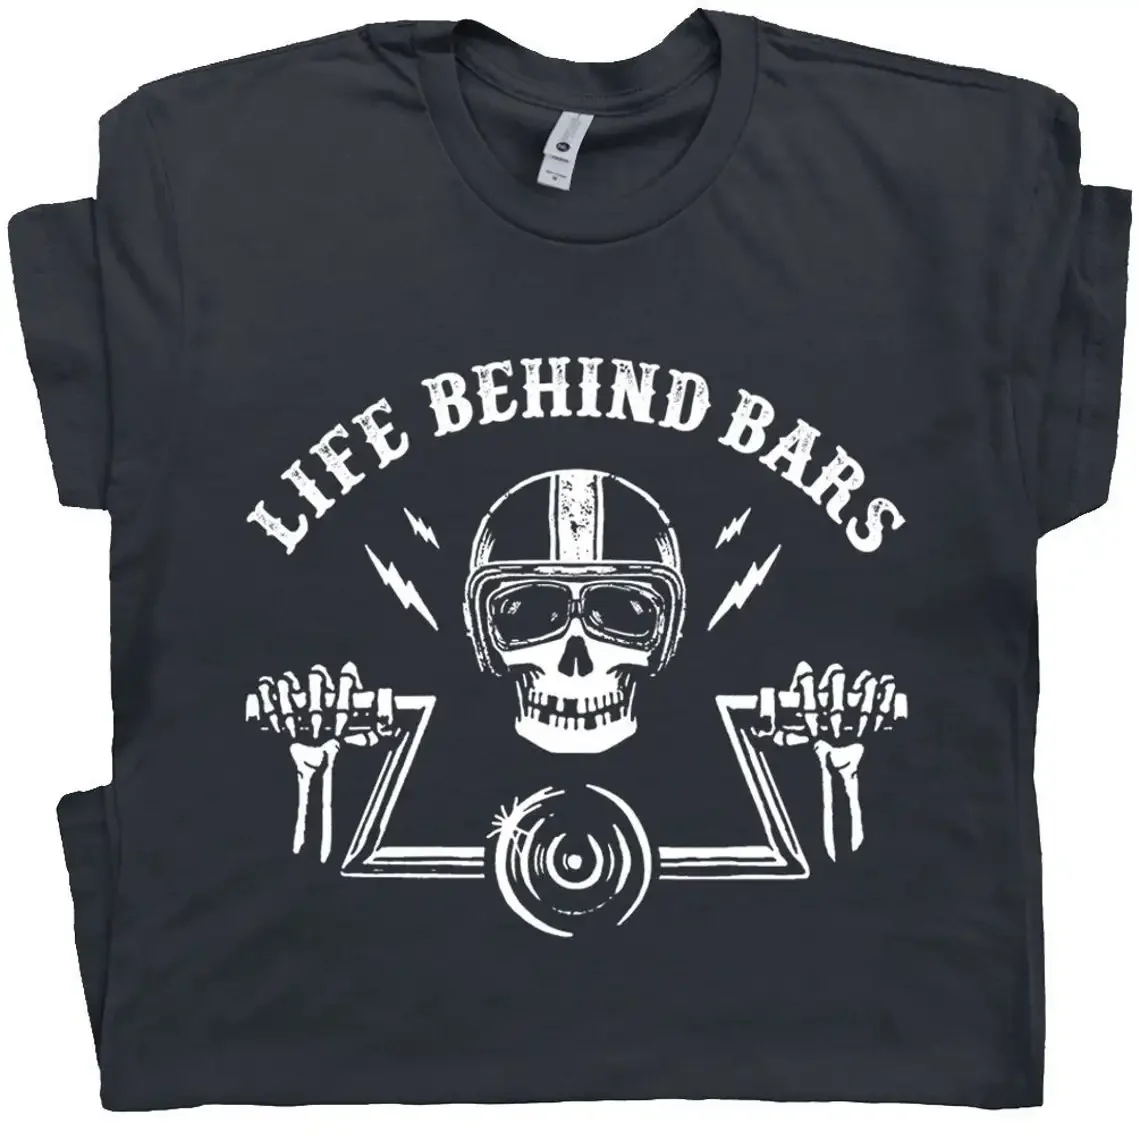 

Motorcycle T Shirt Life Behind Bars Cool Motorcycle Tee Skeleton Decal Biker Humor Route 66 T Shirt Funny Motorcycle T Shirts